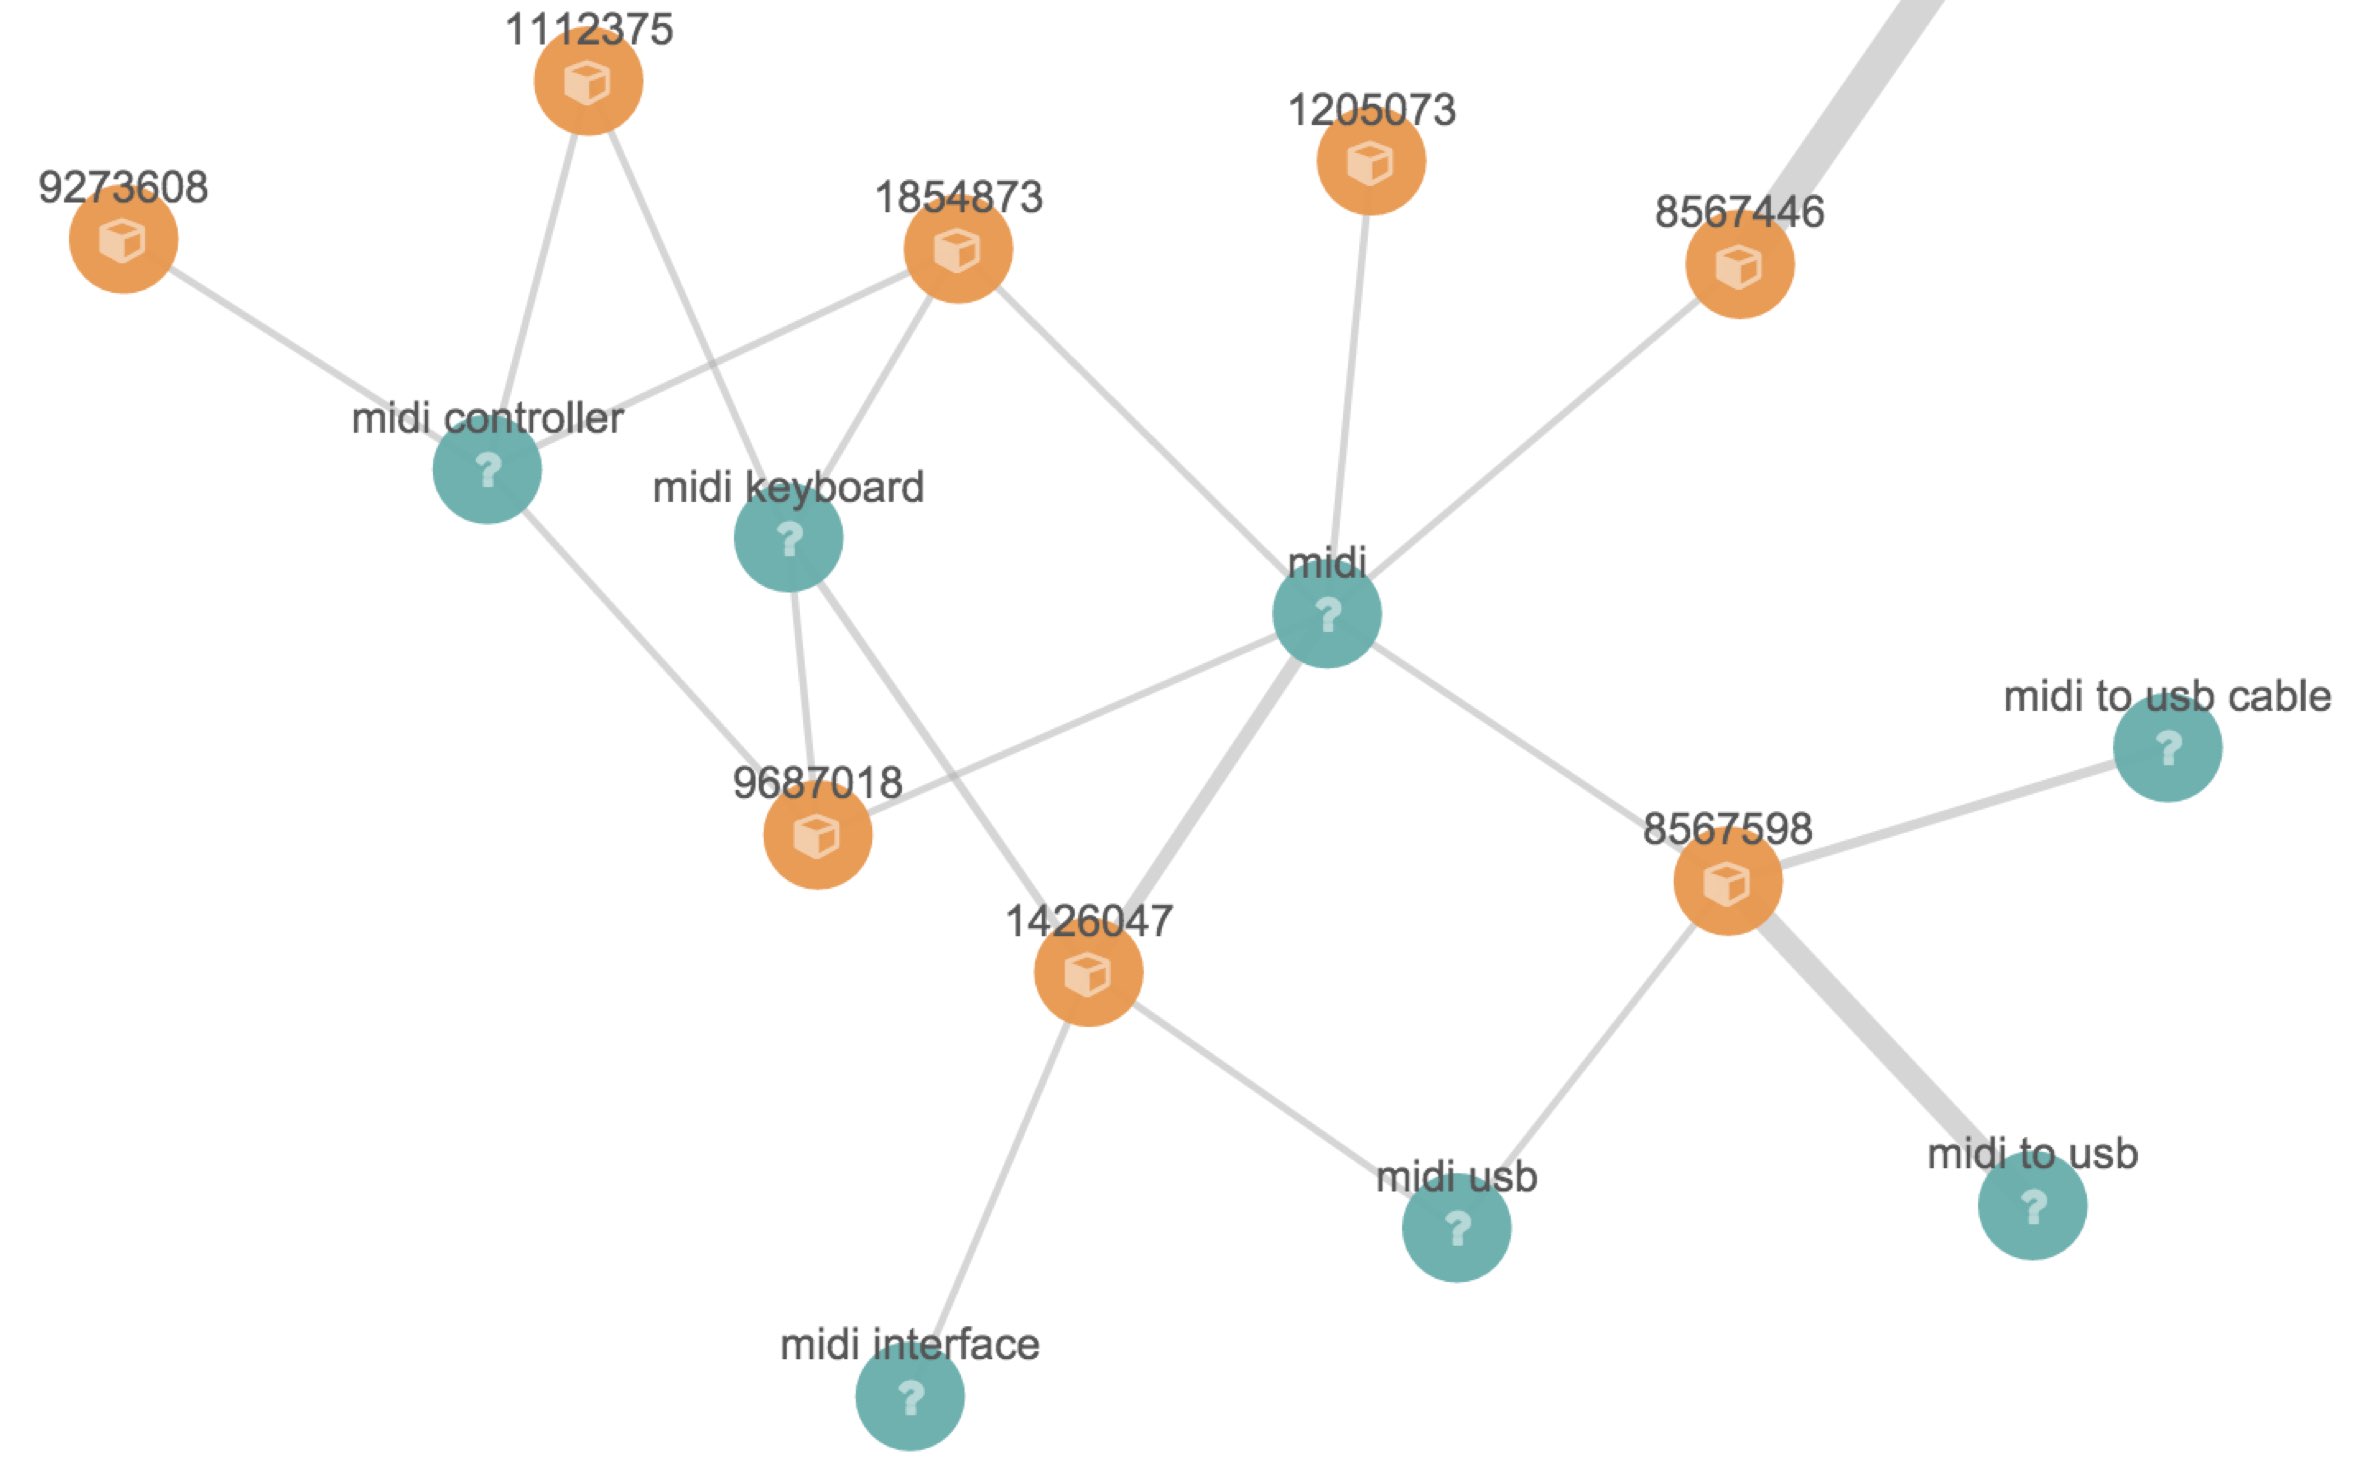 An example visualization of product/search click data using the Kibana Graph UI